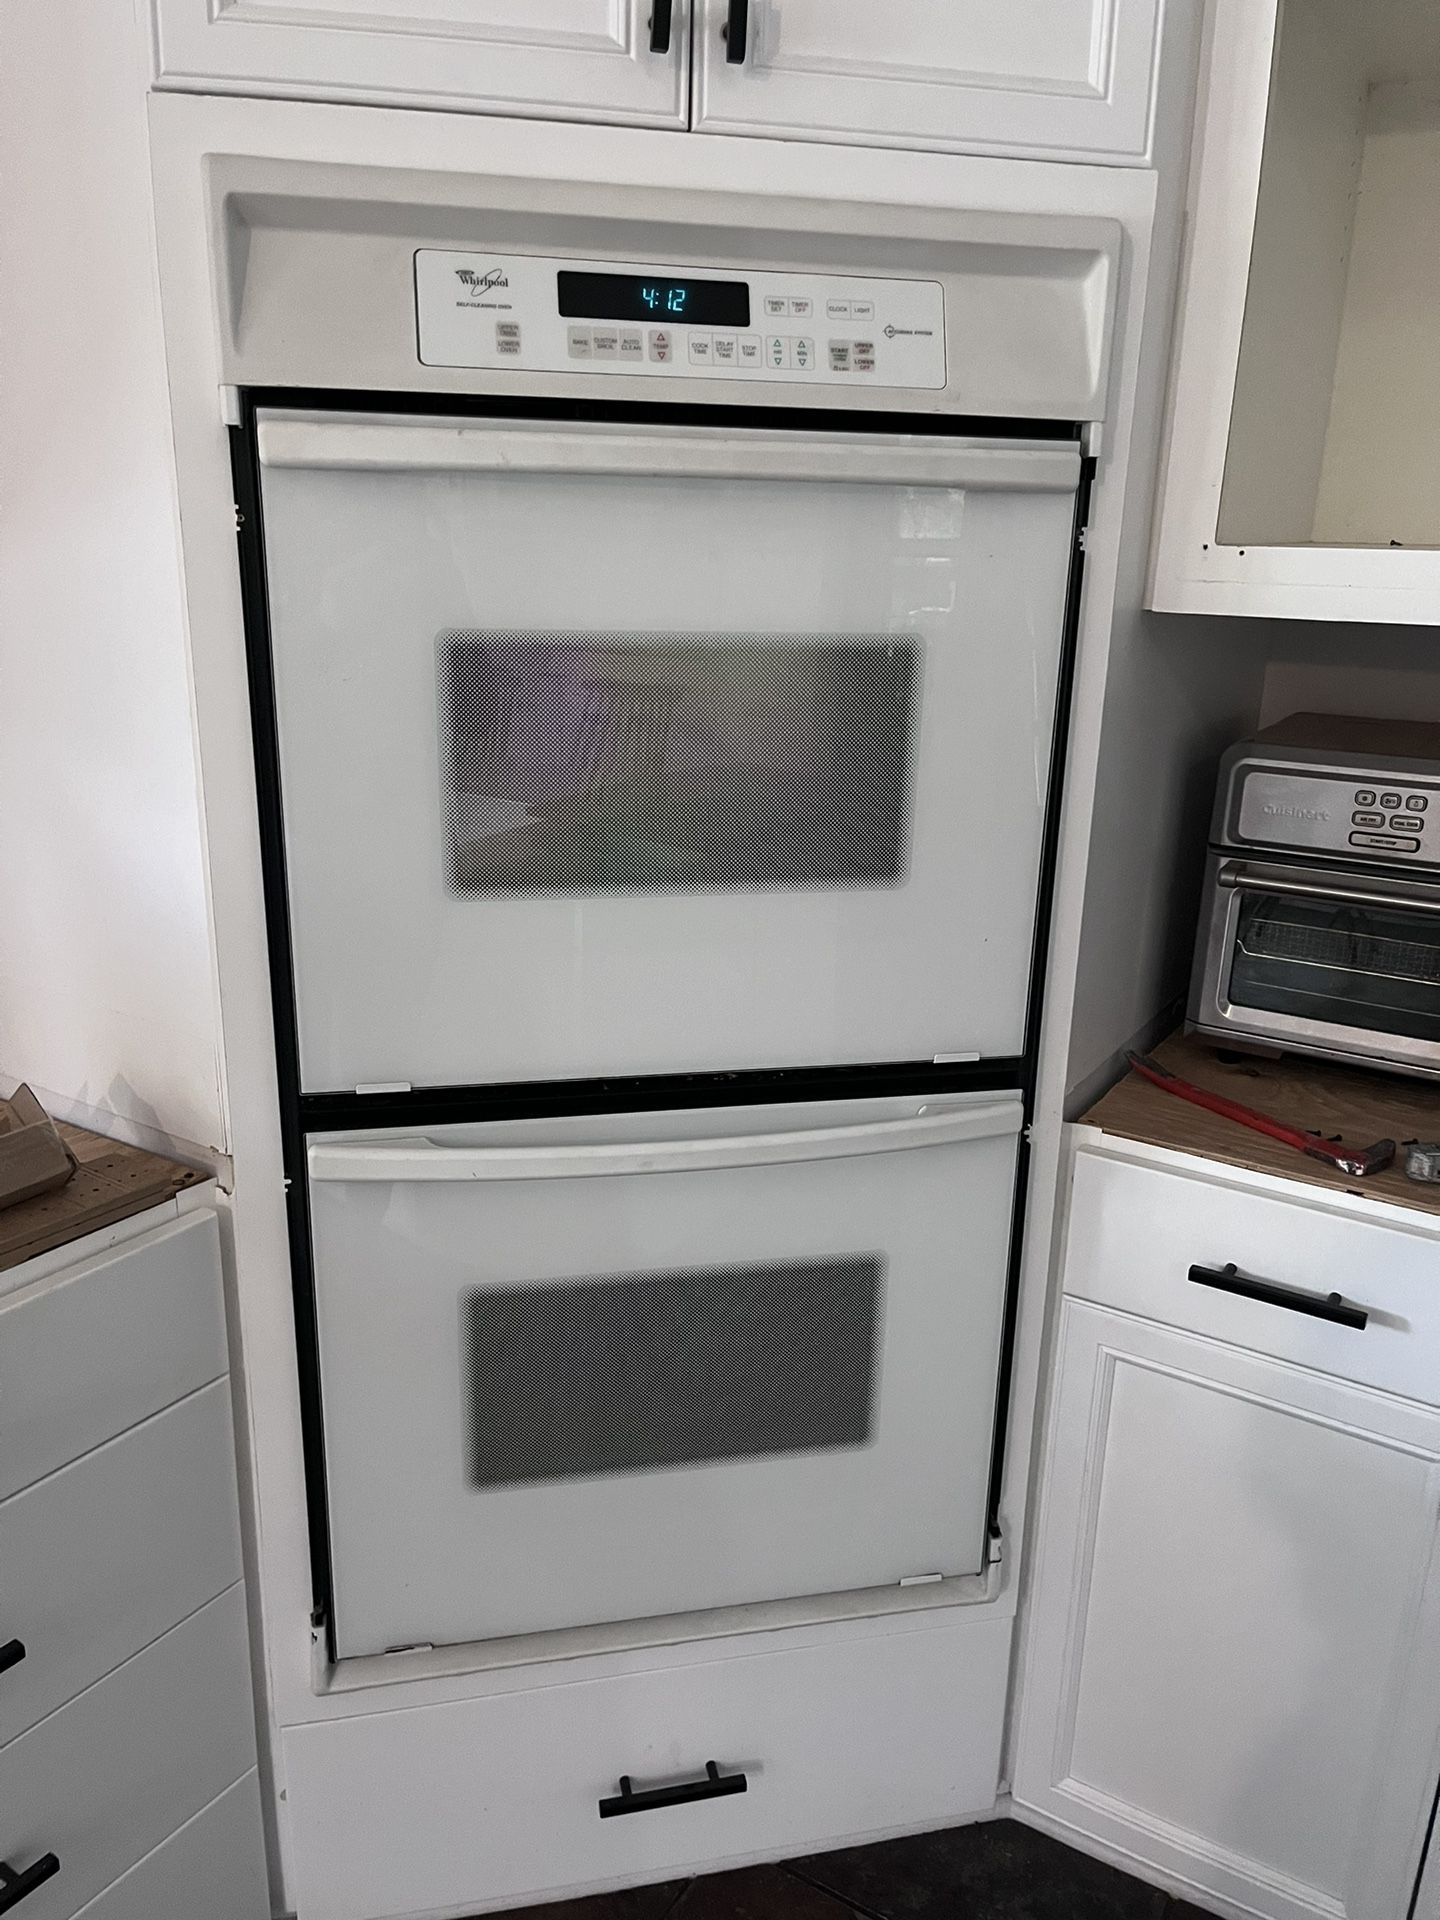 Whirlpool Double Oven, Works Great!